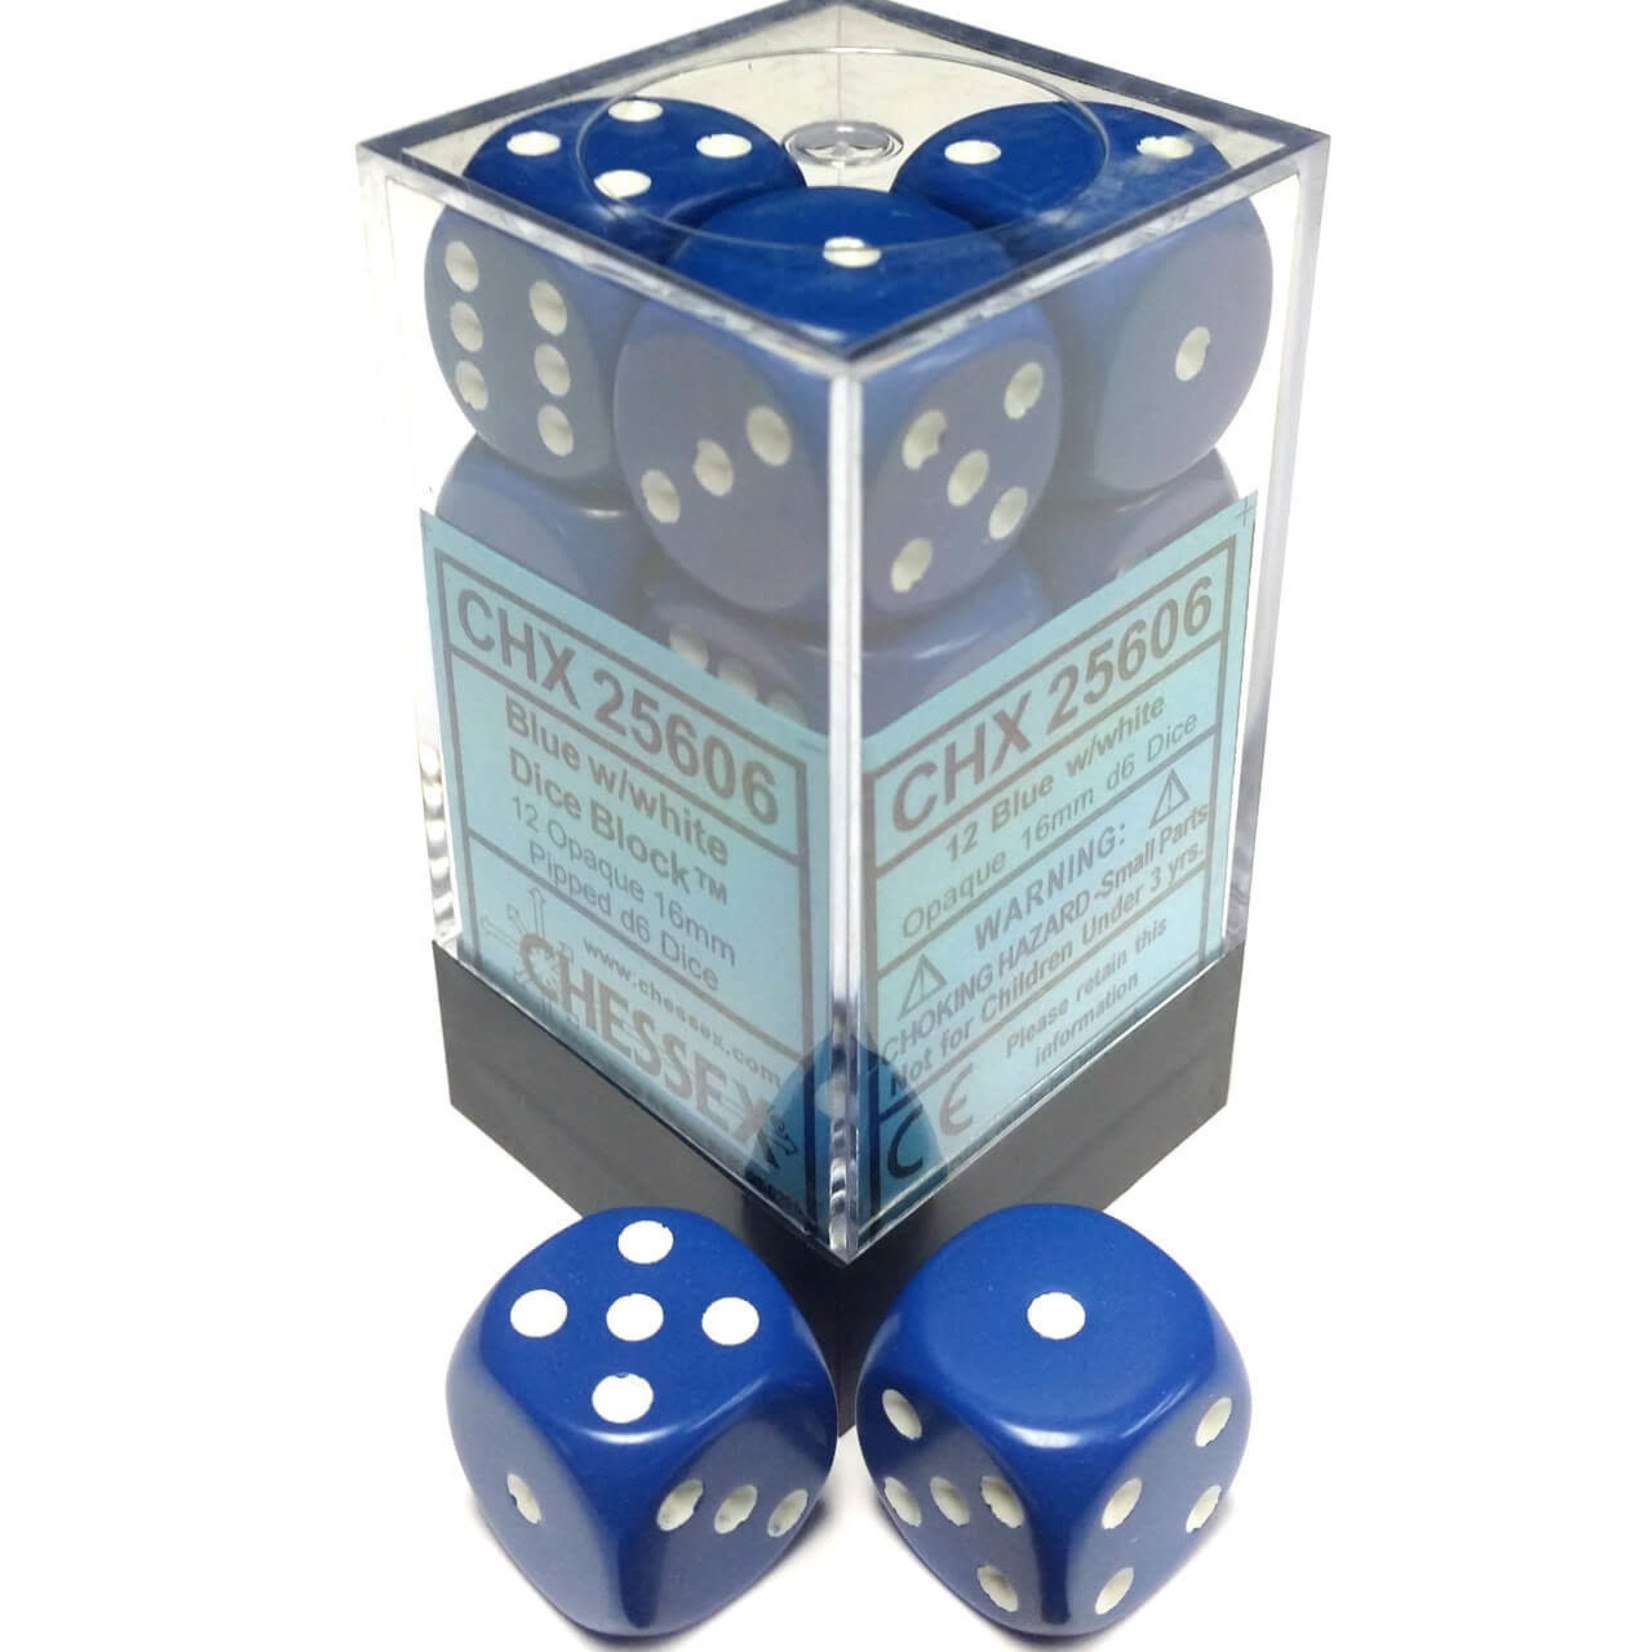 Chessex Opaque Blue/White 16mm d6 (12)